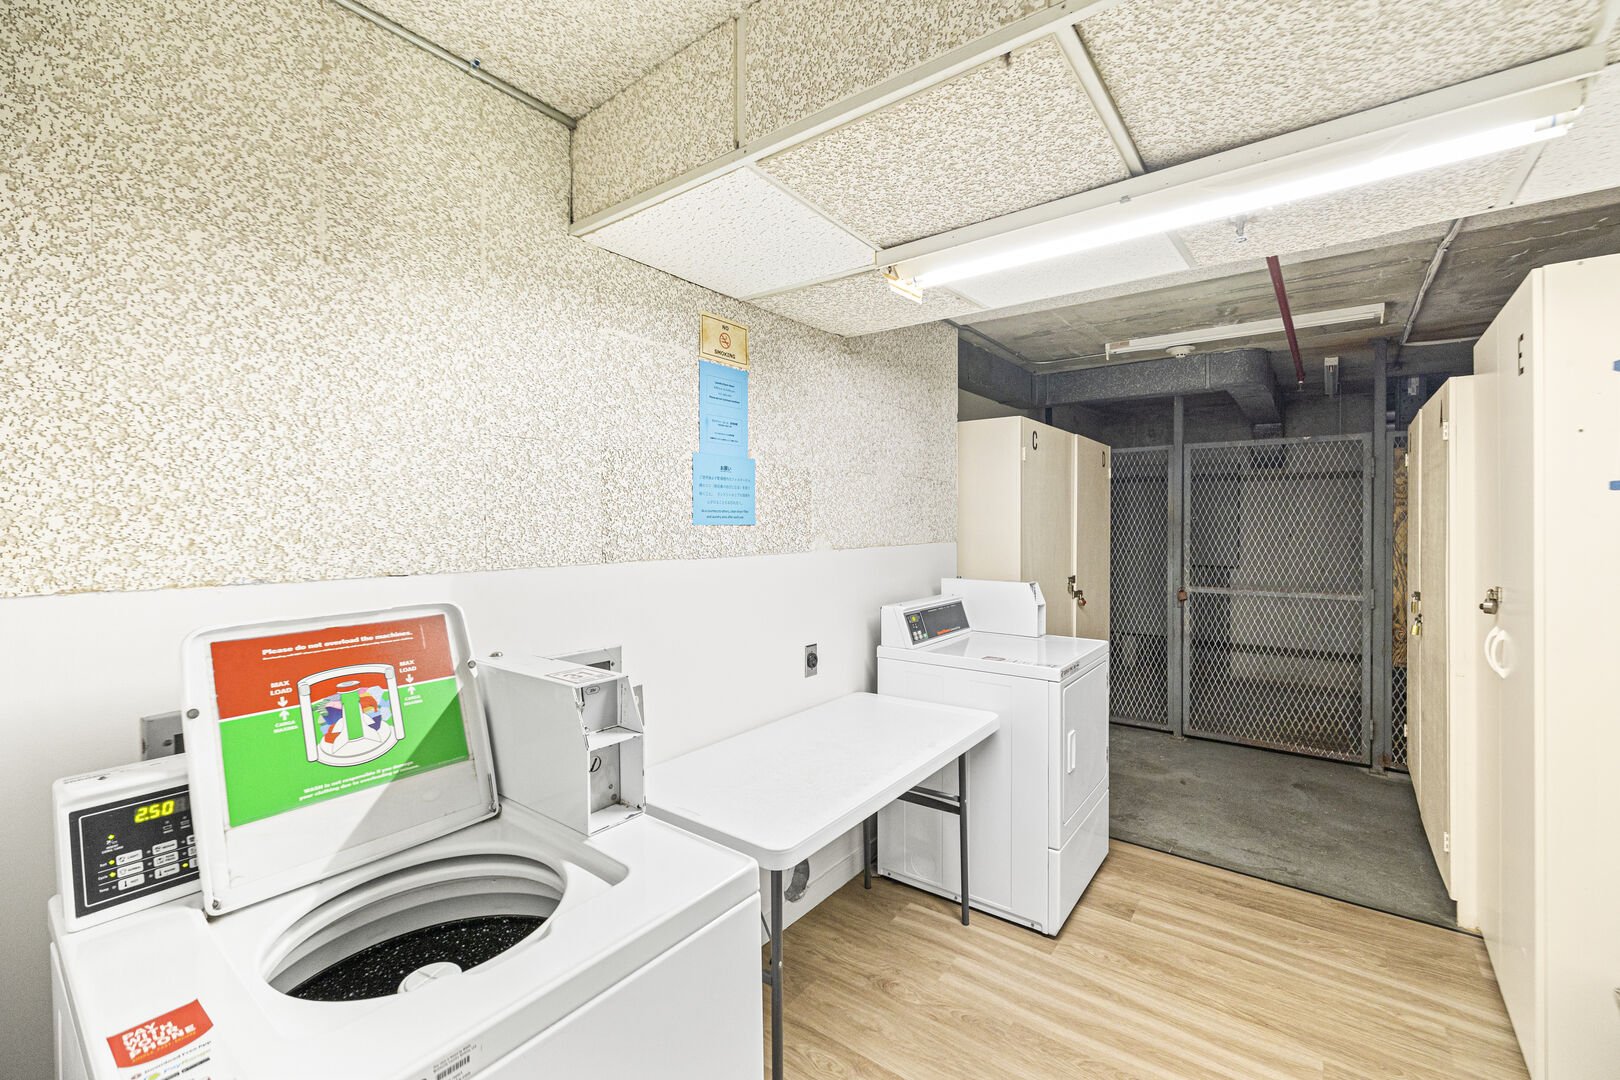 Laundry rooms on each floor with coin-operated washers and dryers.